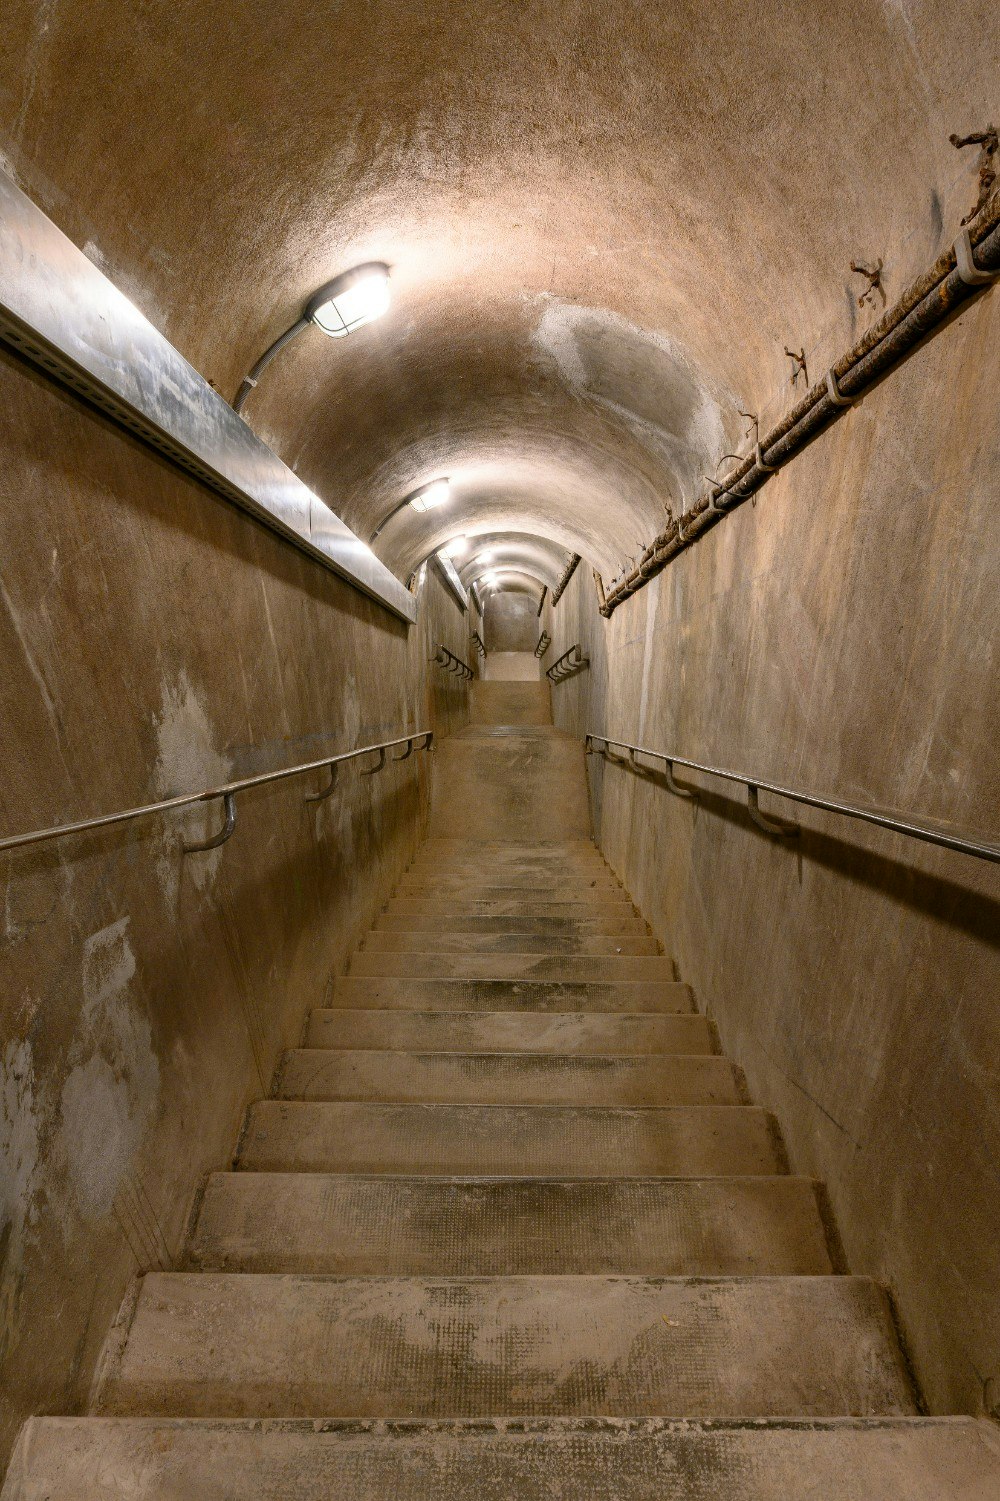 The steps down to Colonel Rol-Tanguy’s underground command post